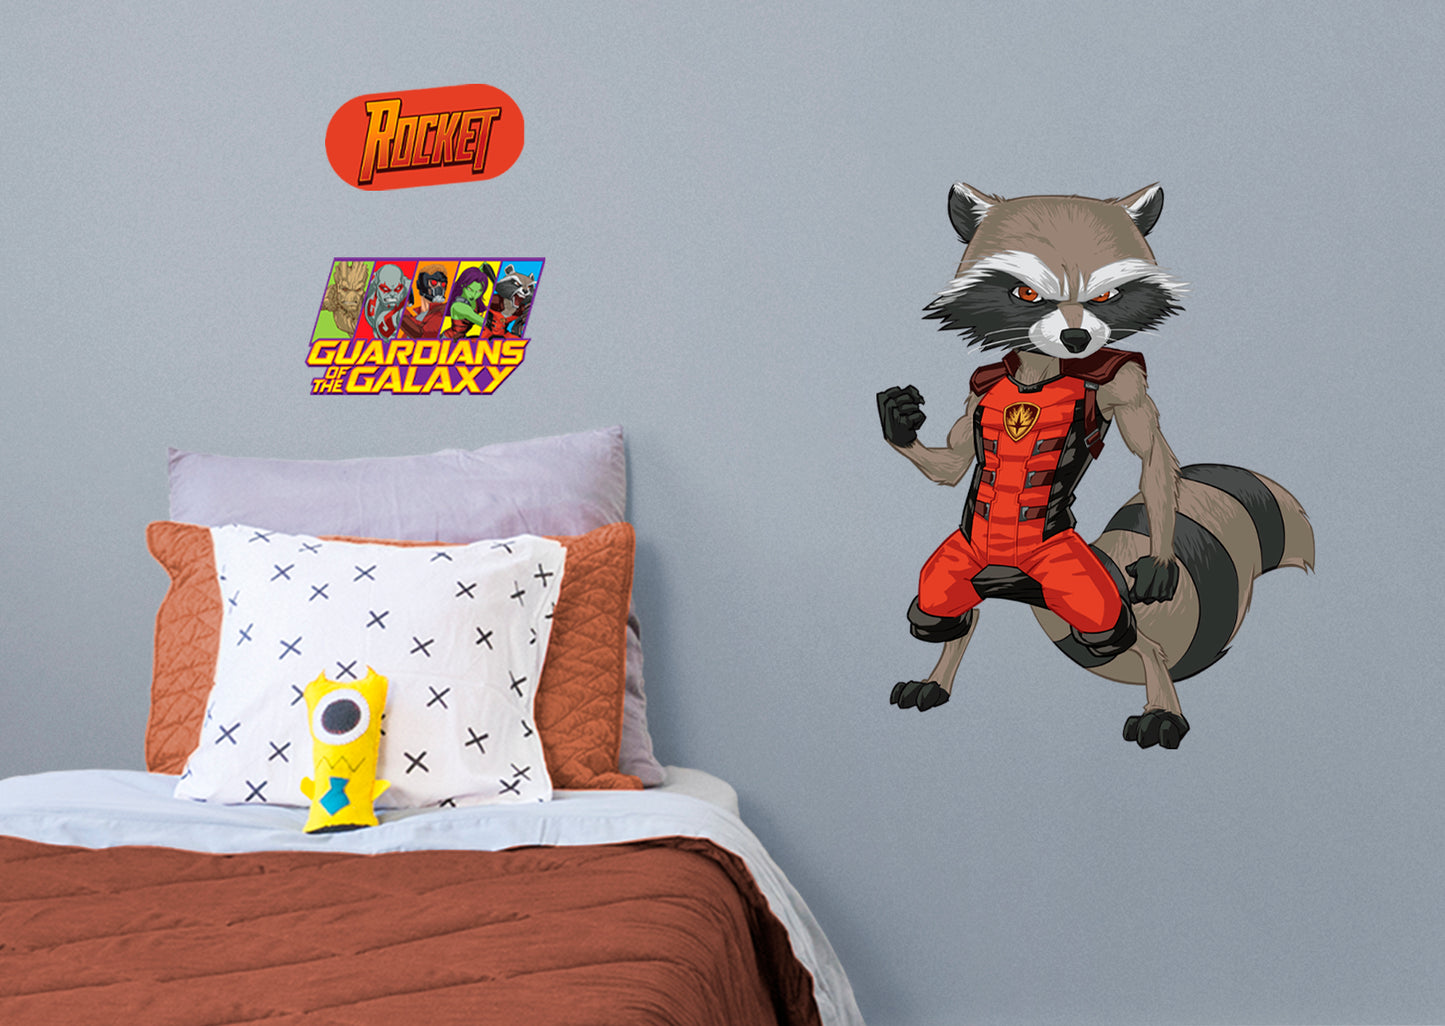 Guardians of the Galaxy Rocket Racoon RealBig        - Officially Licensed Marvel Removable Wall   Adhesive Decal